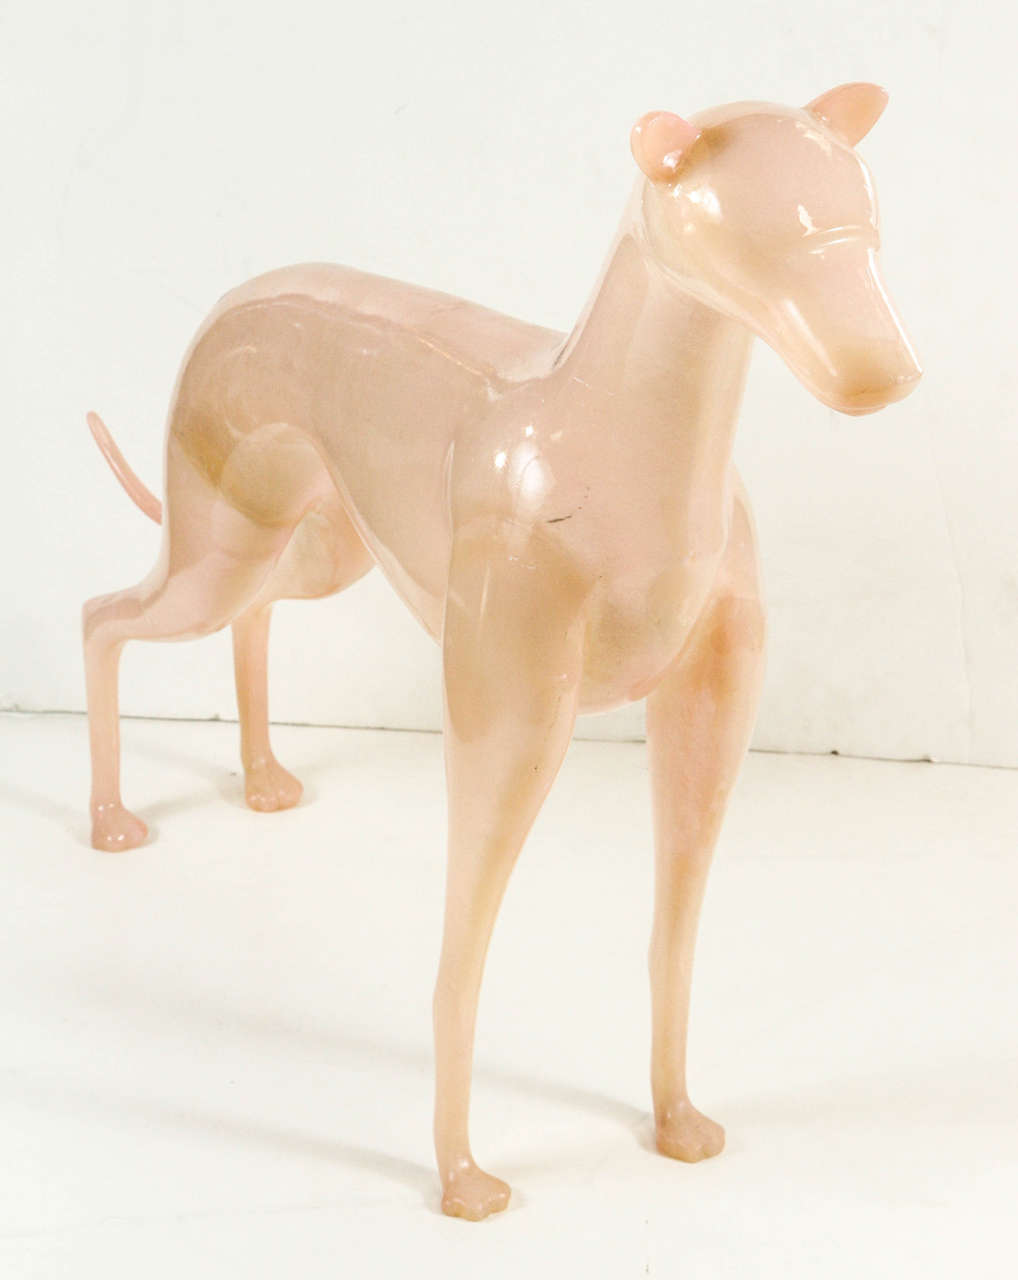 Vintage sculpture of a standing whippet dog cast from a light pink resin material.